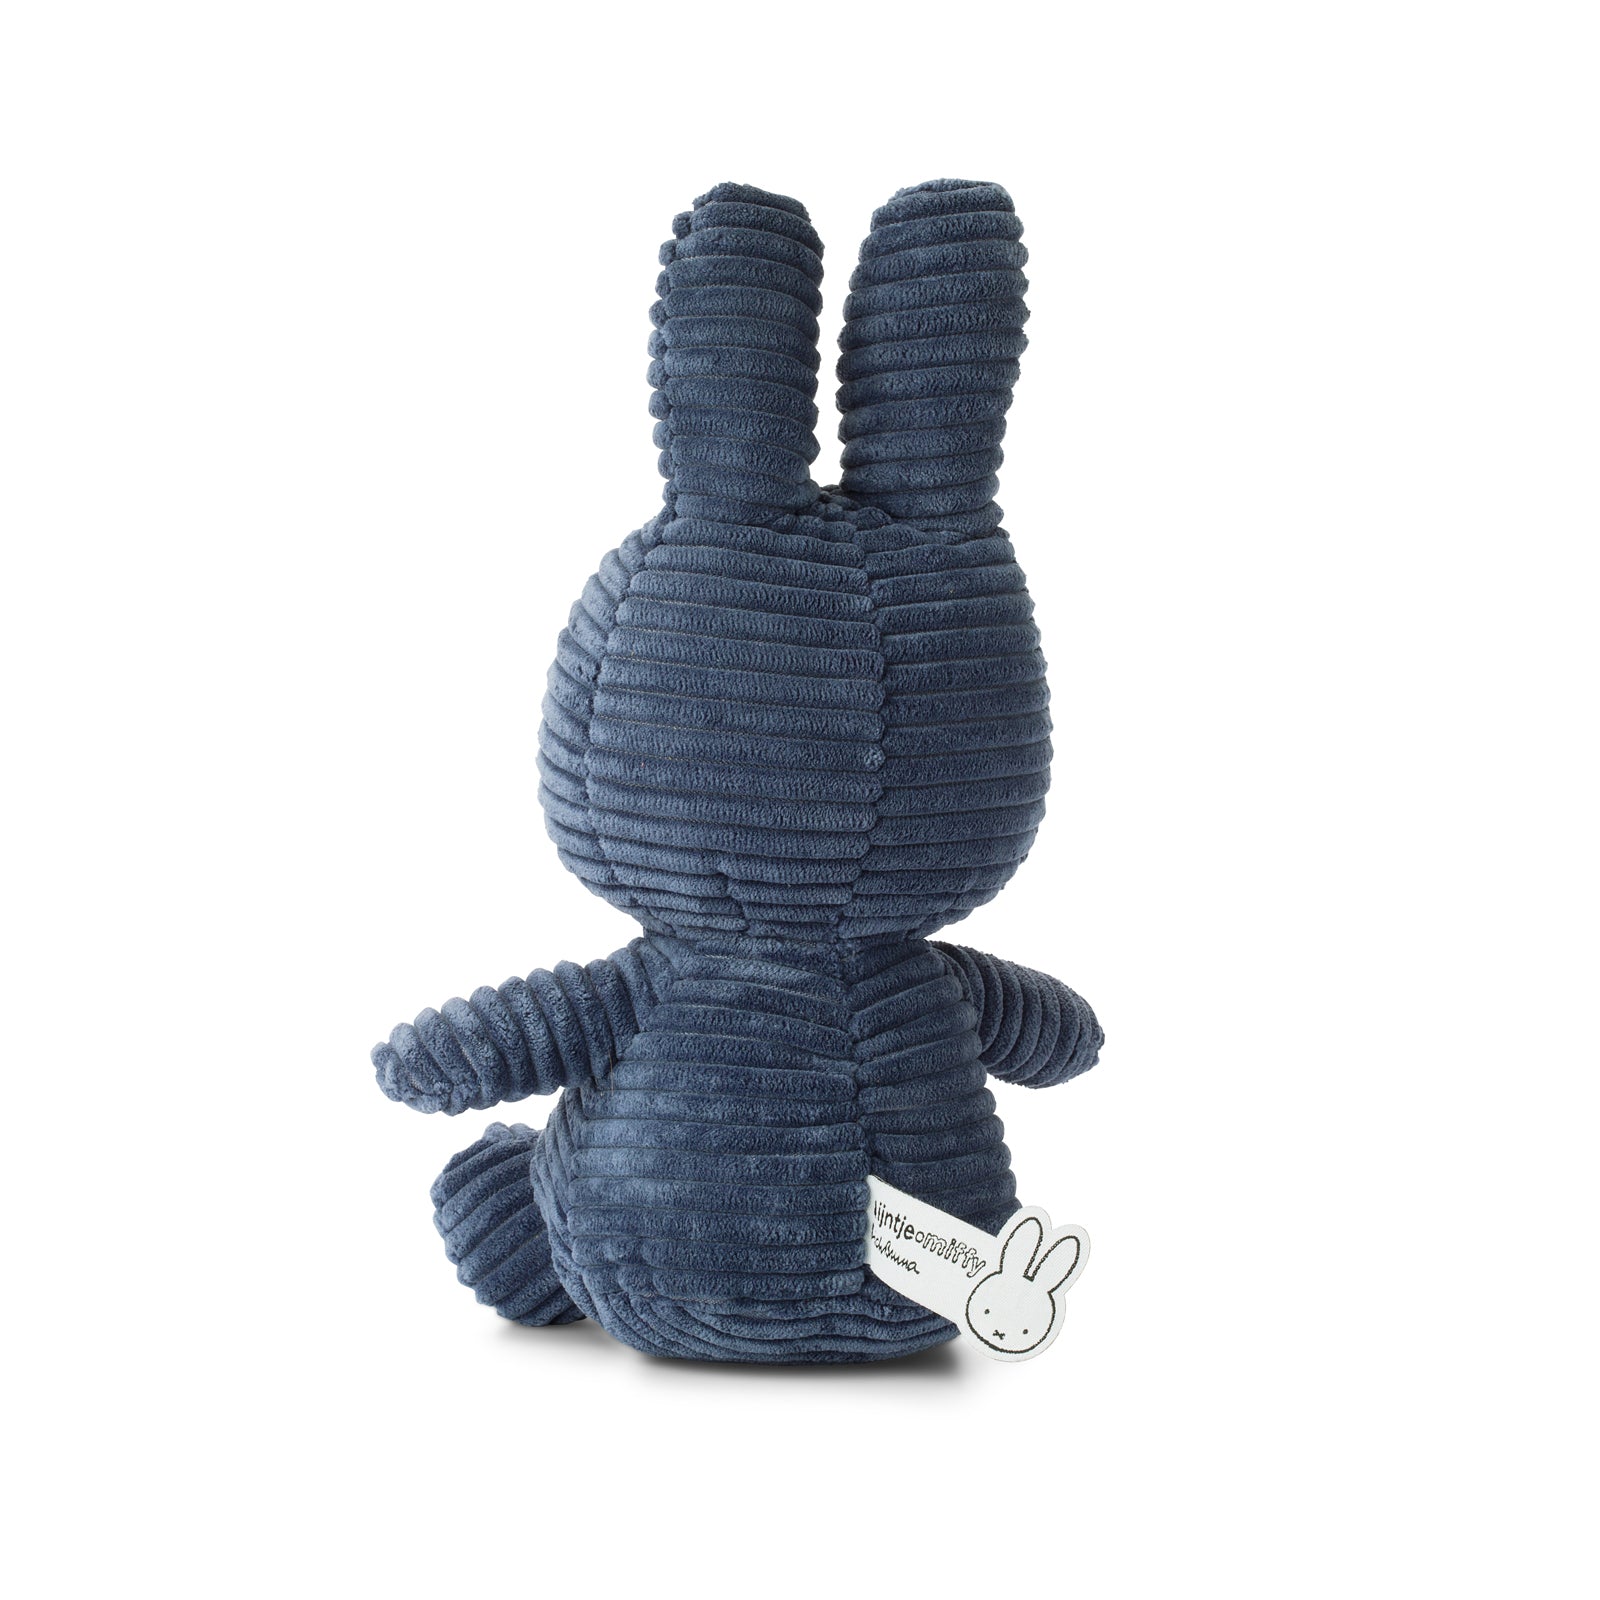 Back view of Miffy the rabbit